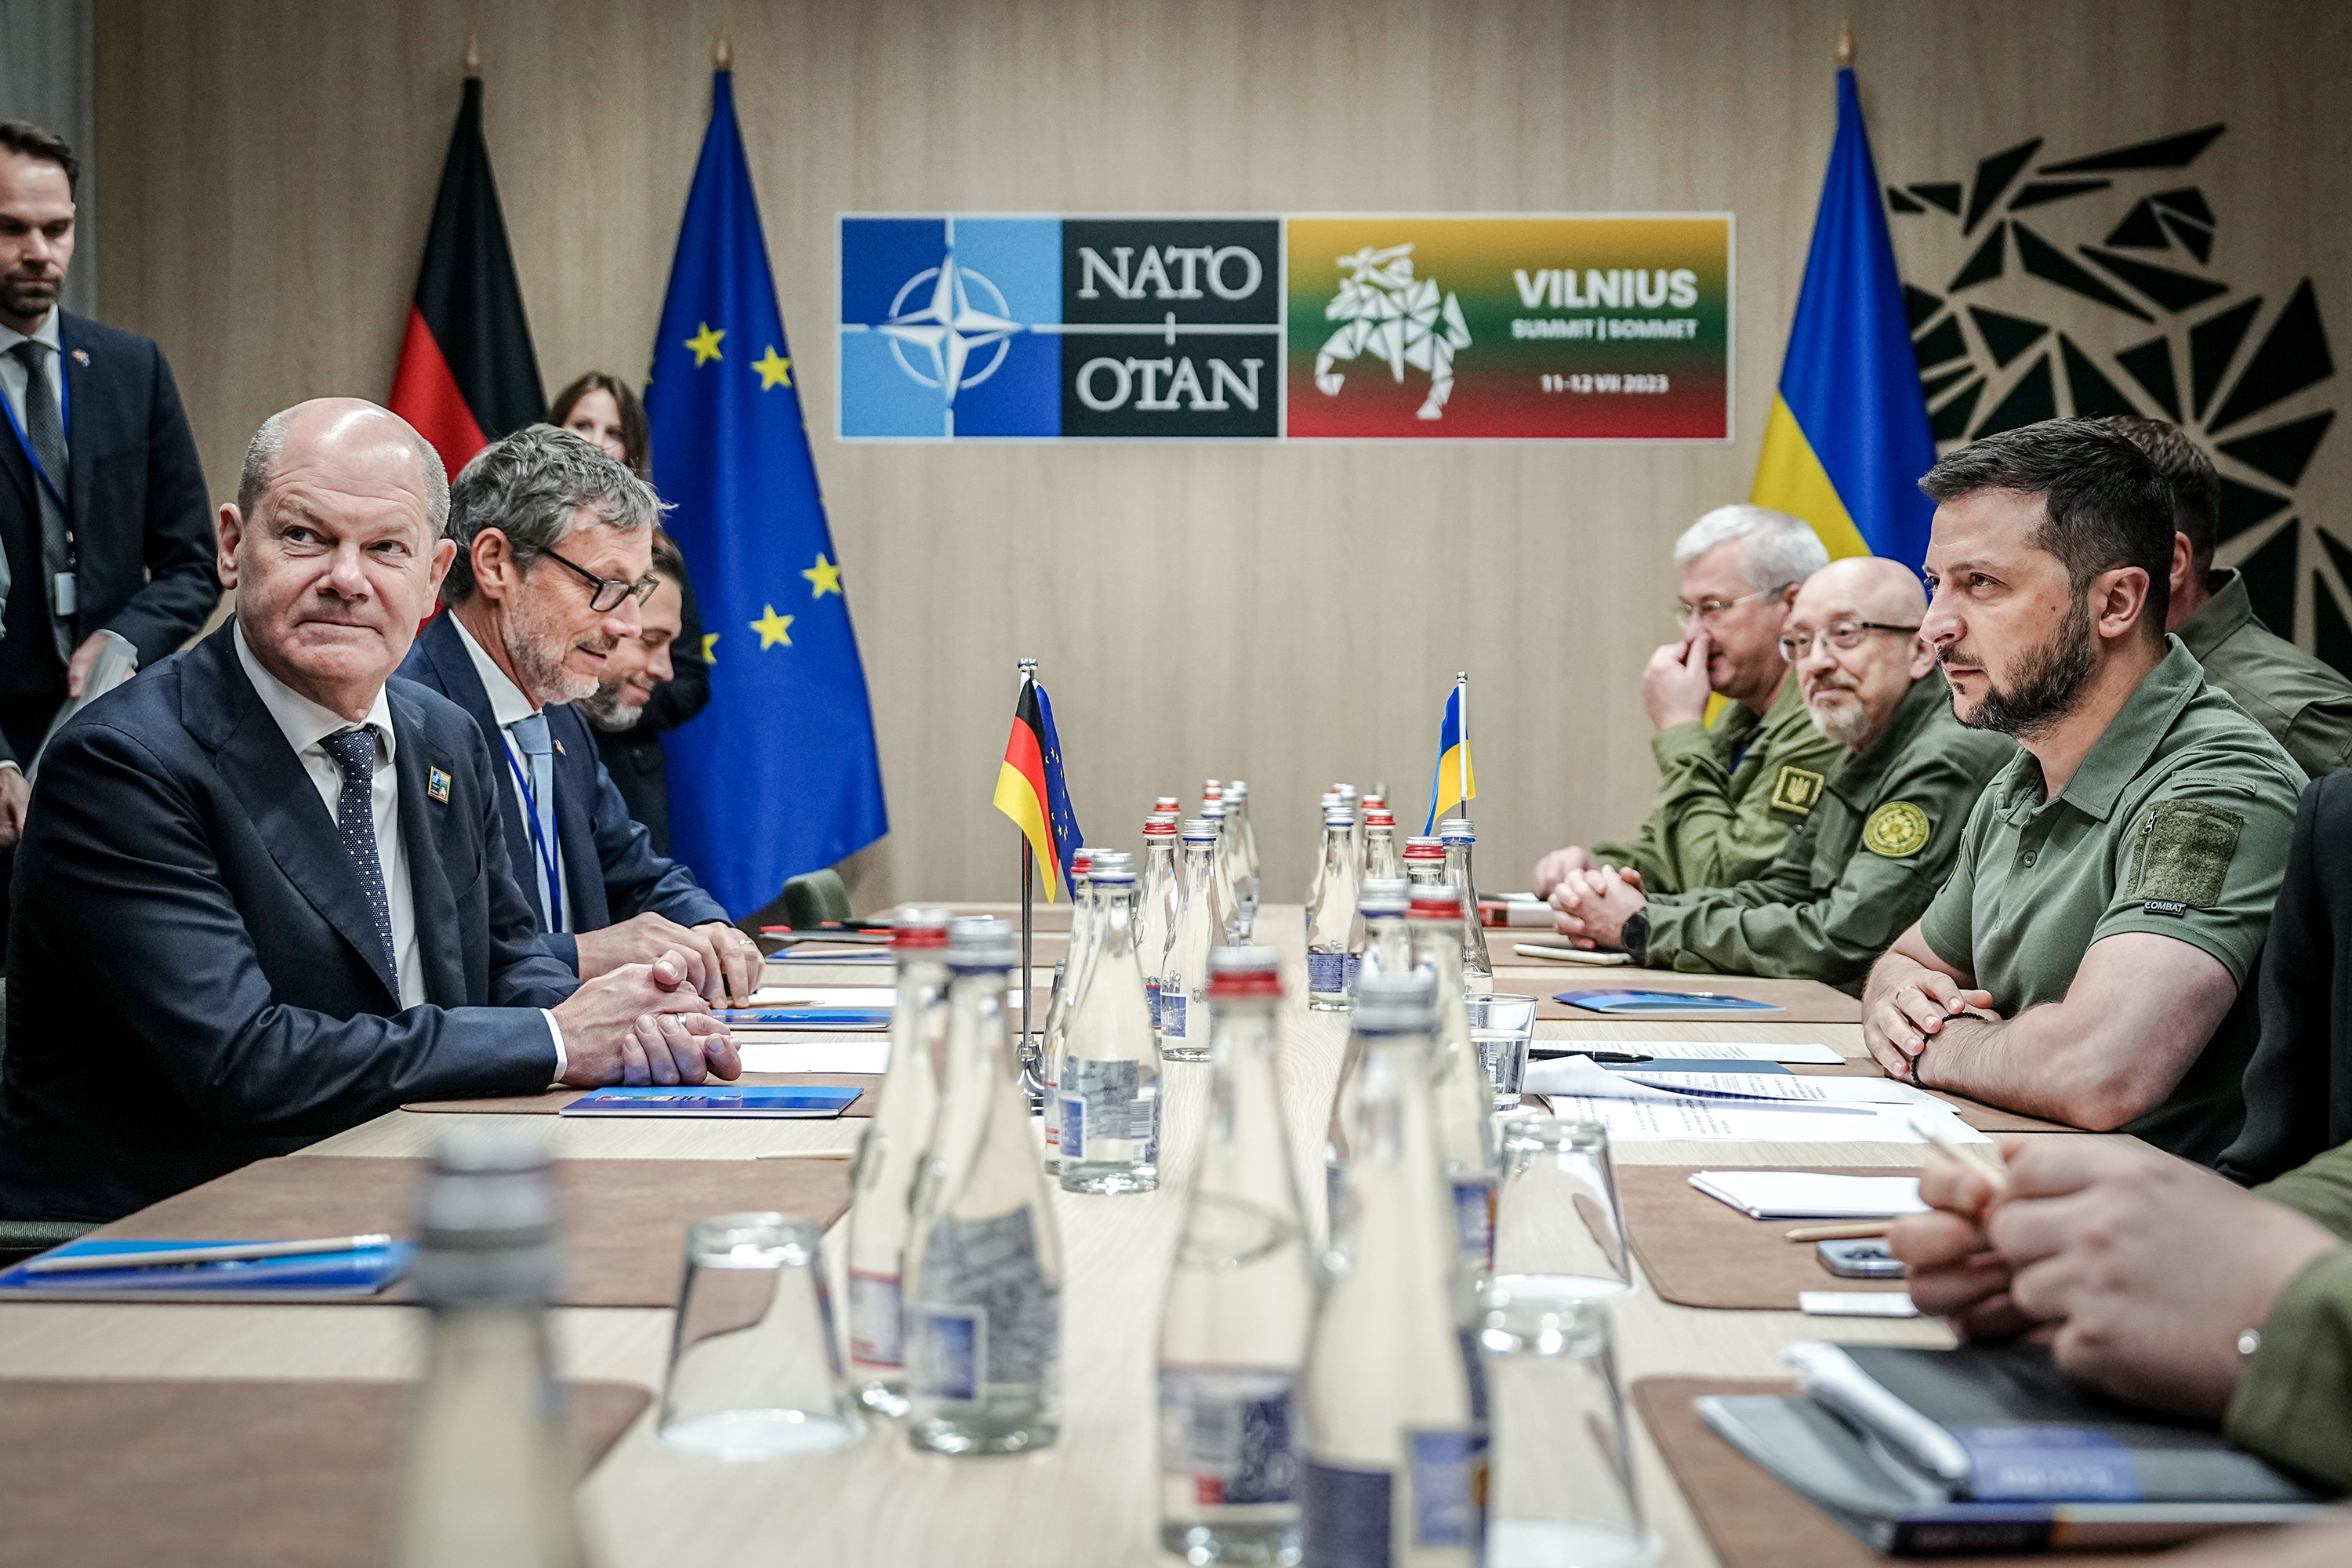 German Chancellor Olaf Scholz and Ukrainian President Volodymyr Zelensky meet at the NATO summit on July 12, in Vilnius, Lithuania.